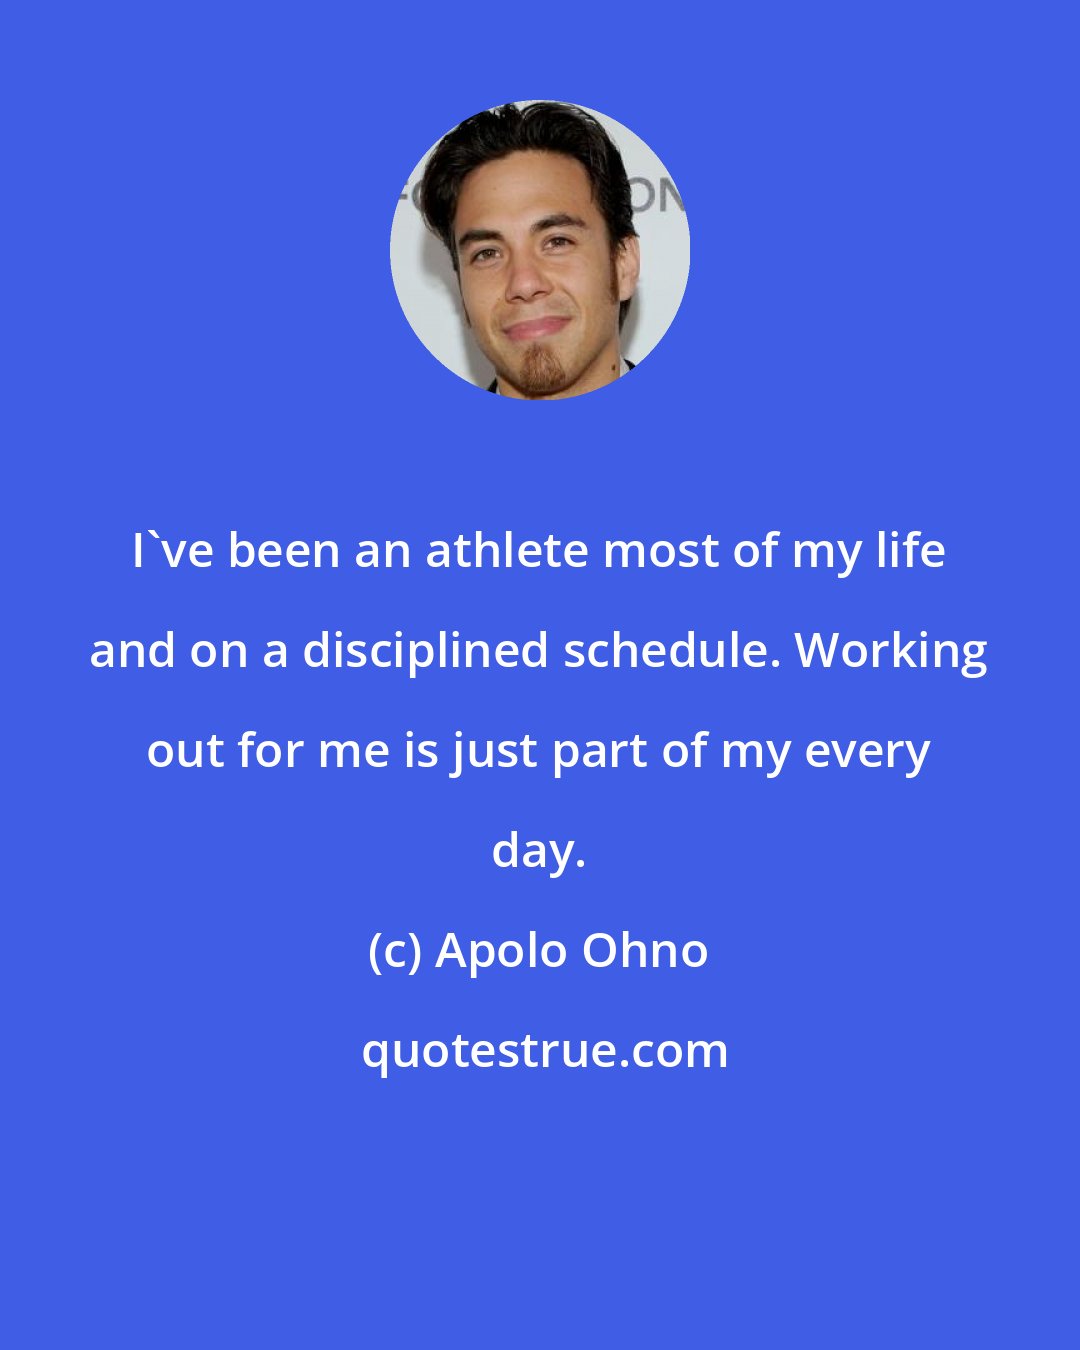 Apolo Ohno: I've been an athlete most of my life and on a disciplined schedule. Working out for me is just part of my every day.